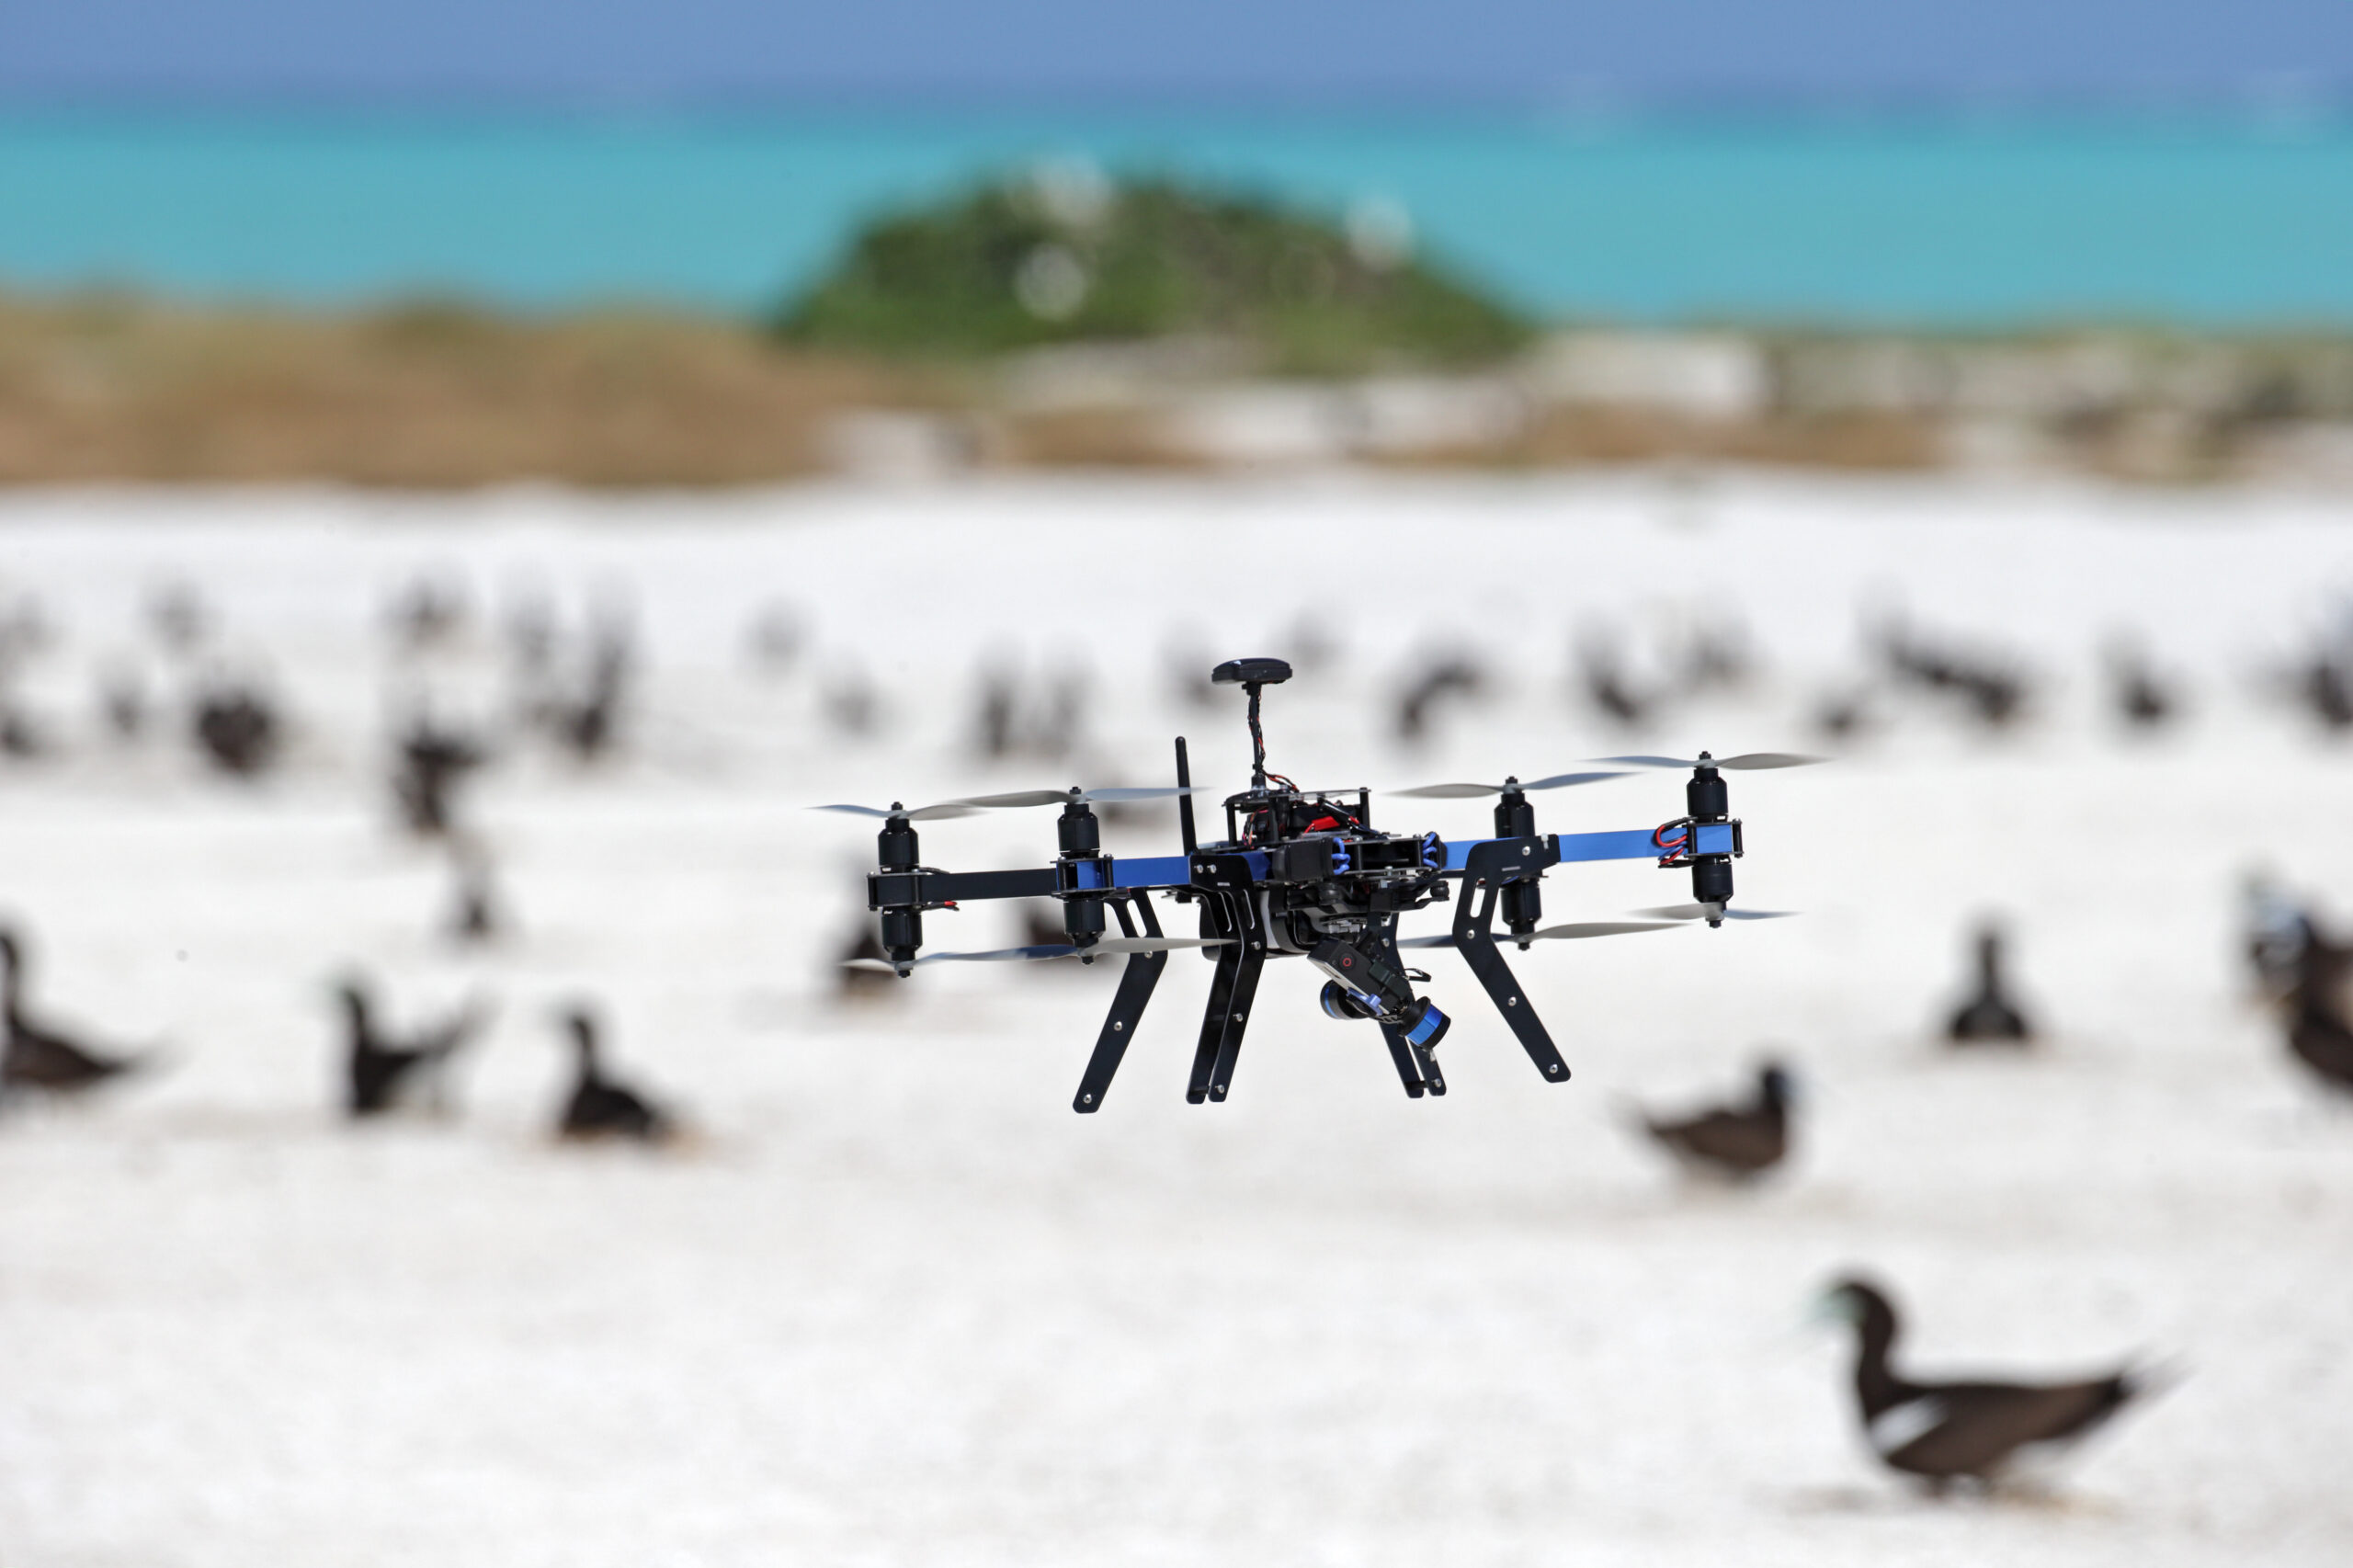 Drones Are Great At Counting Birds, Study Finds